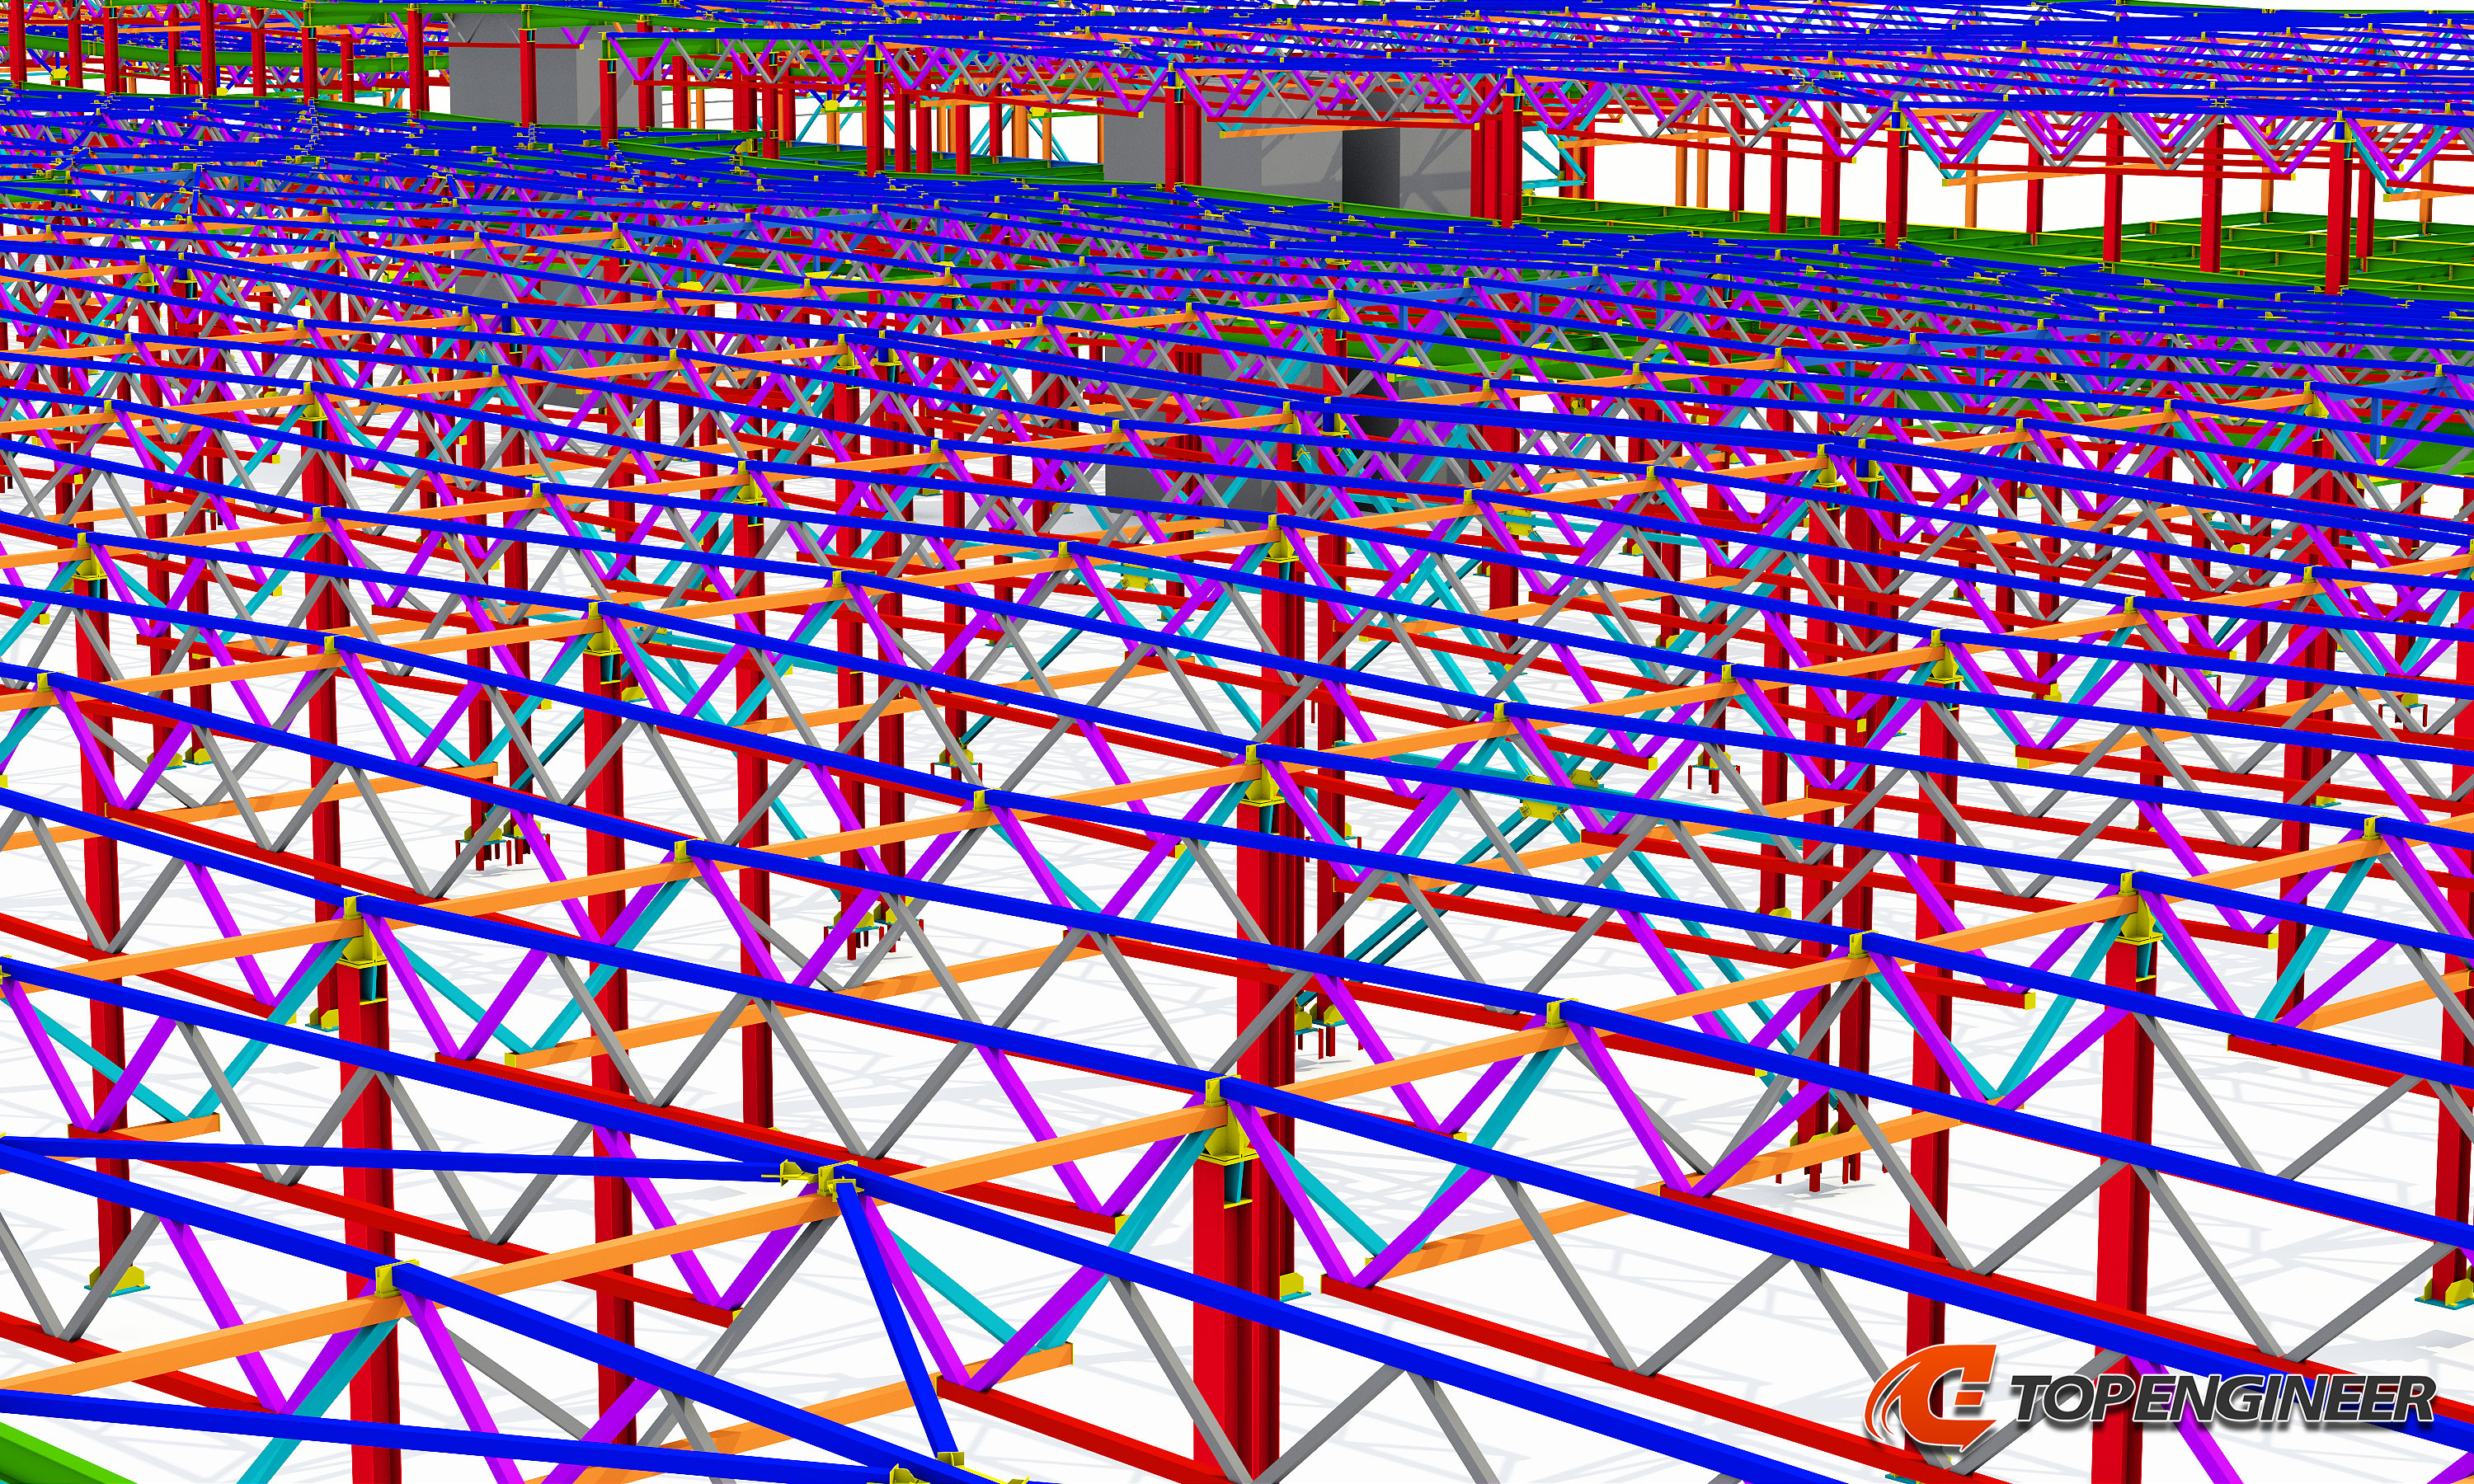 Structural detailing services using Tekla Structures